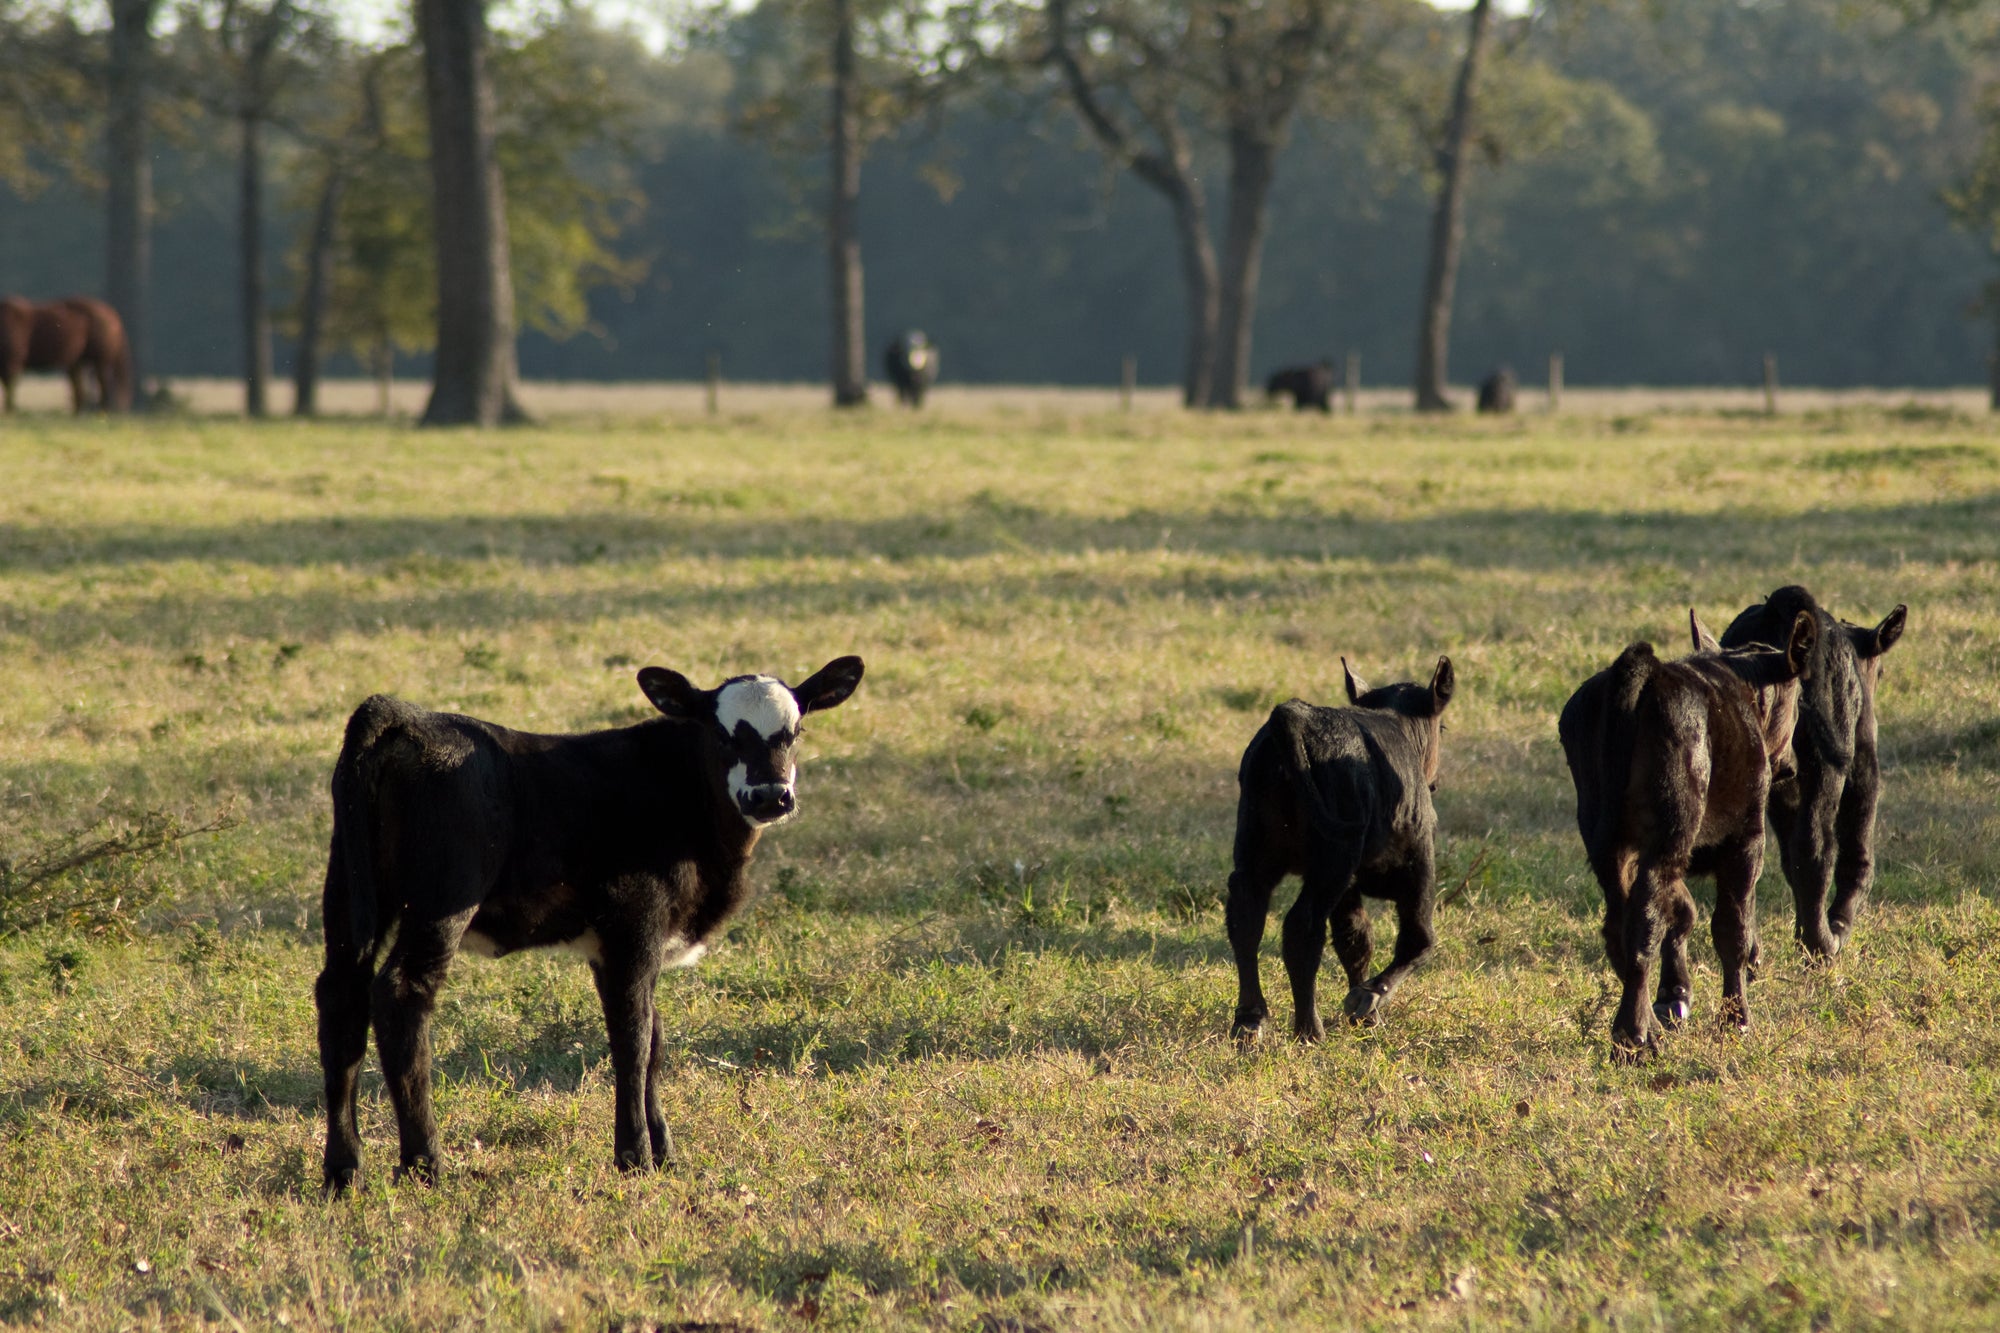 The Economics of Eating Beef from a Small Local Farm